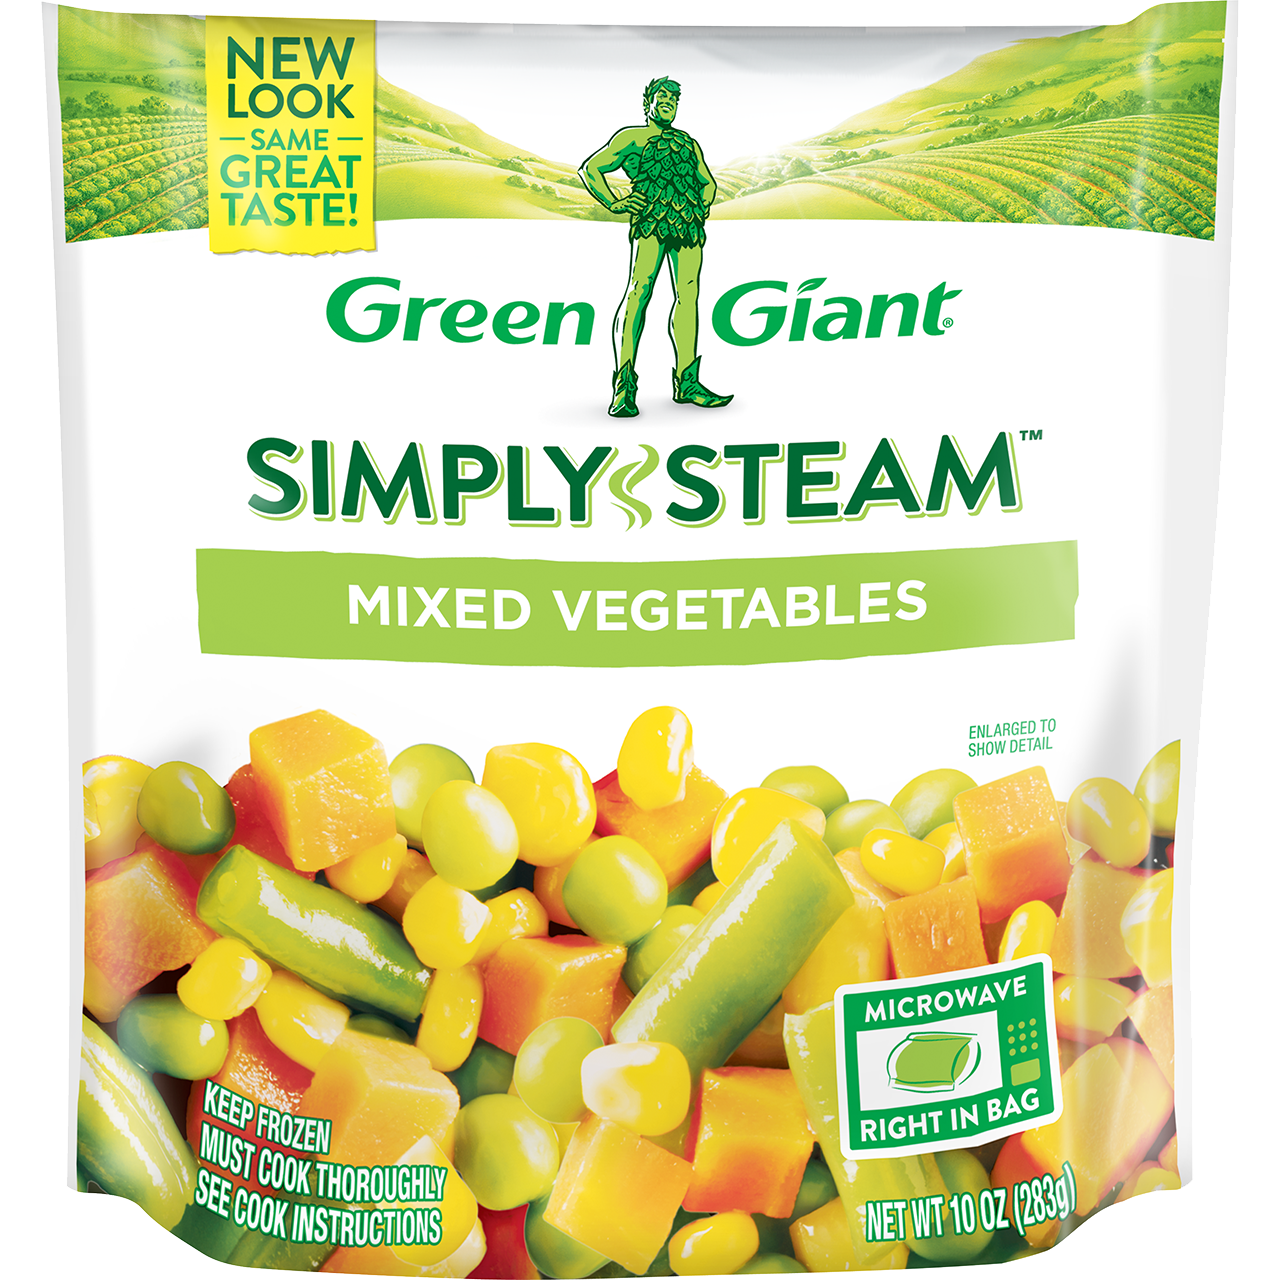 Discover the ultimate freshness with Green Giant Simply Steam Mixed Vegetables. Picked at peak perfection, frozen fast, ready for you to prepare for your family at a moment's notice!